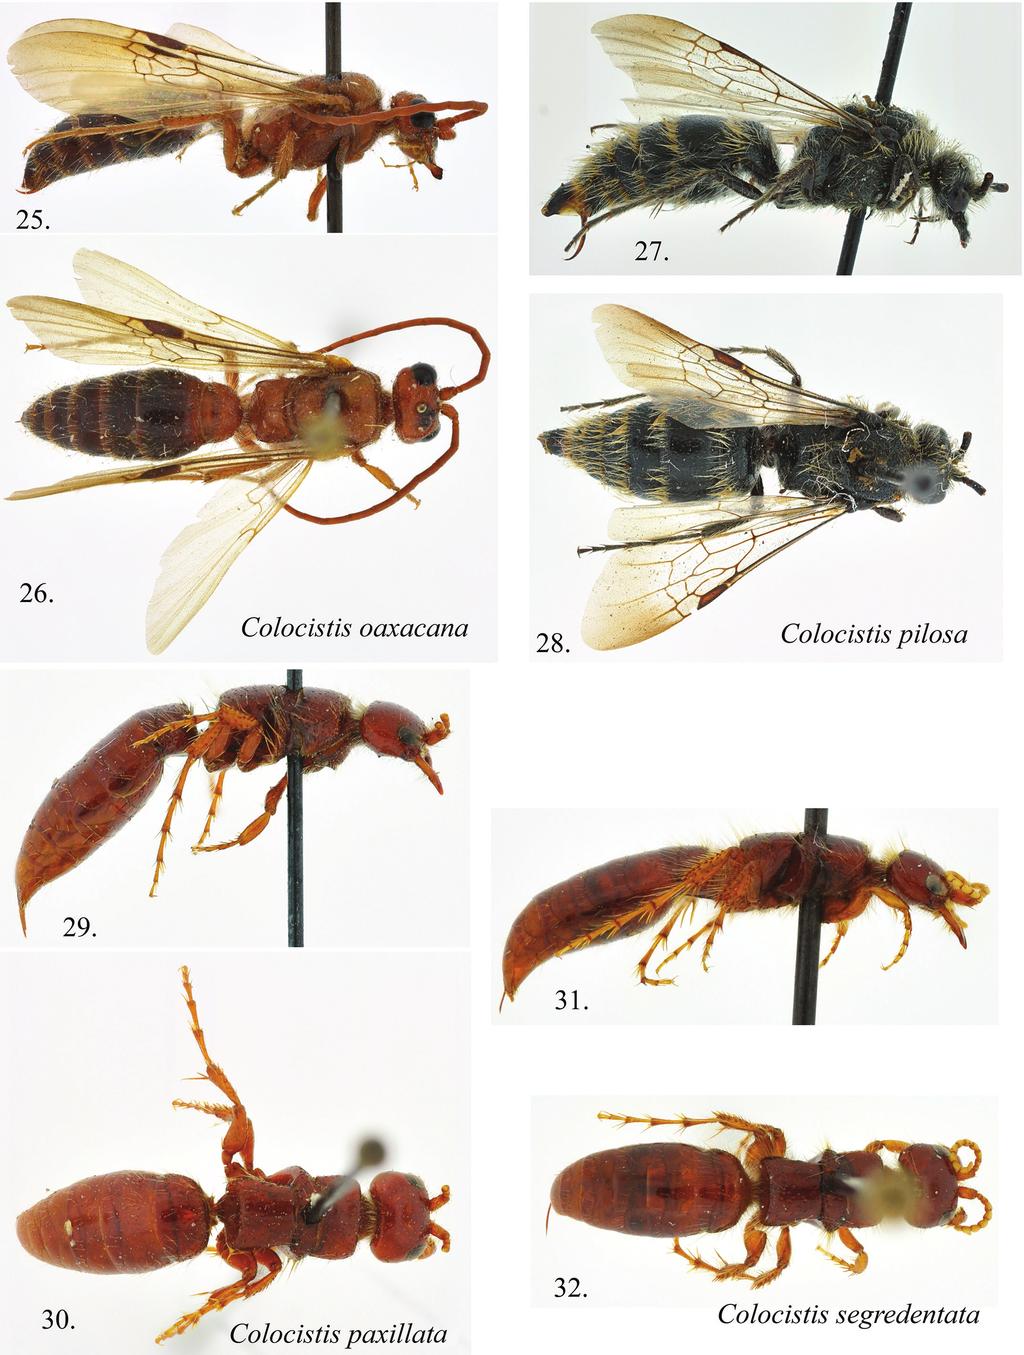 14 L.S. Kimsey & M.S. Wasbauer / Journal of Hymenoptera Research 33: 1 24 (2013) Figures 25 32. 25 28. Males. 29 32 Females.